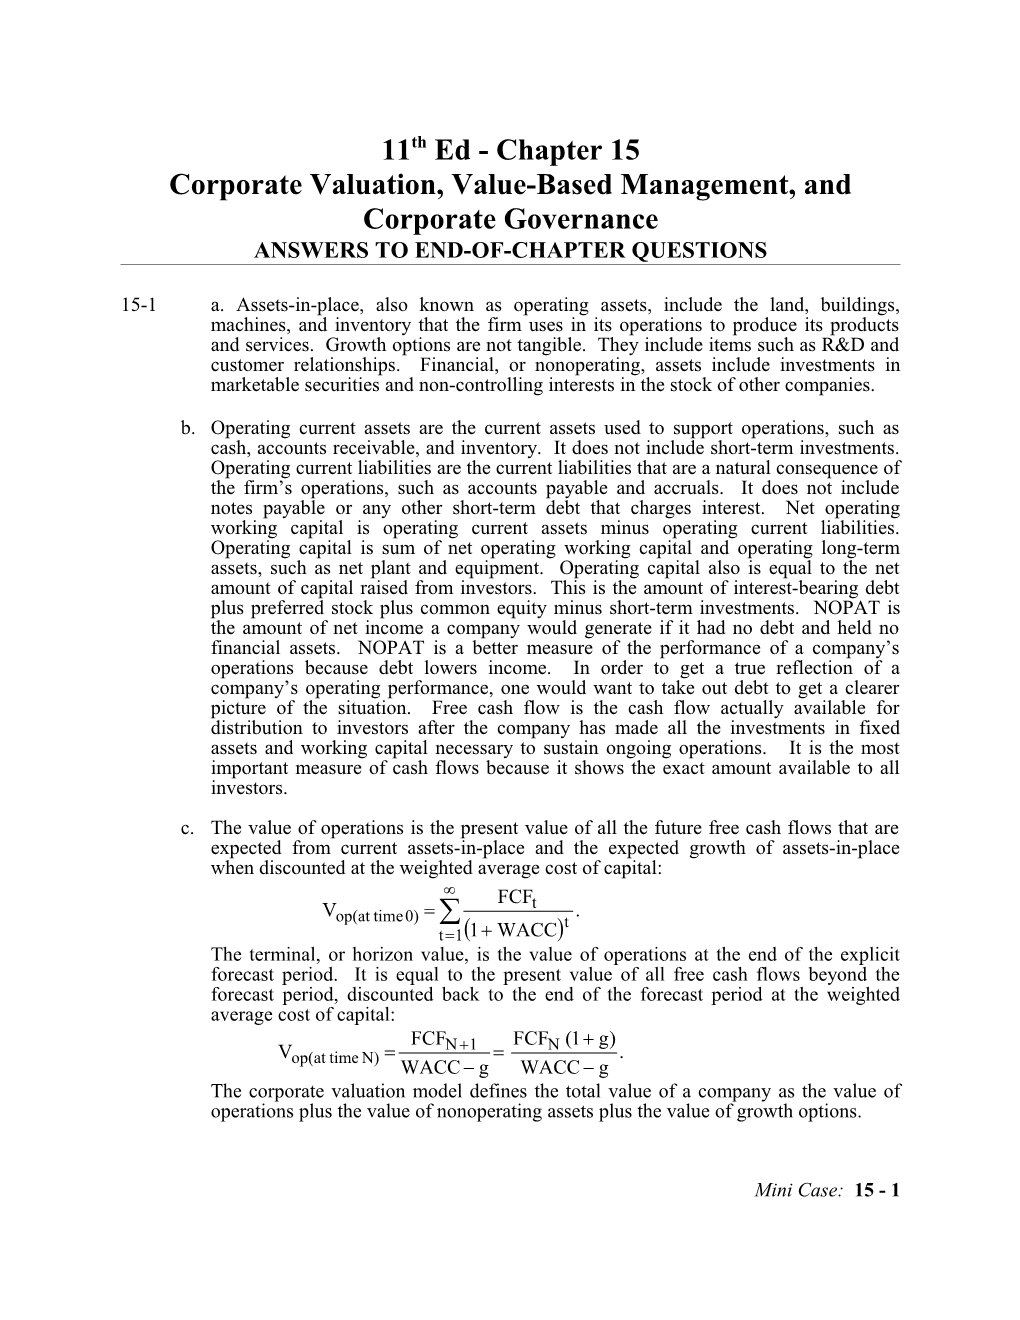 Corporate Valuation, Instructor's Manual